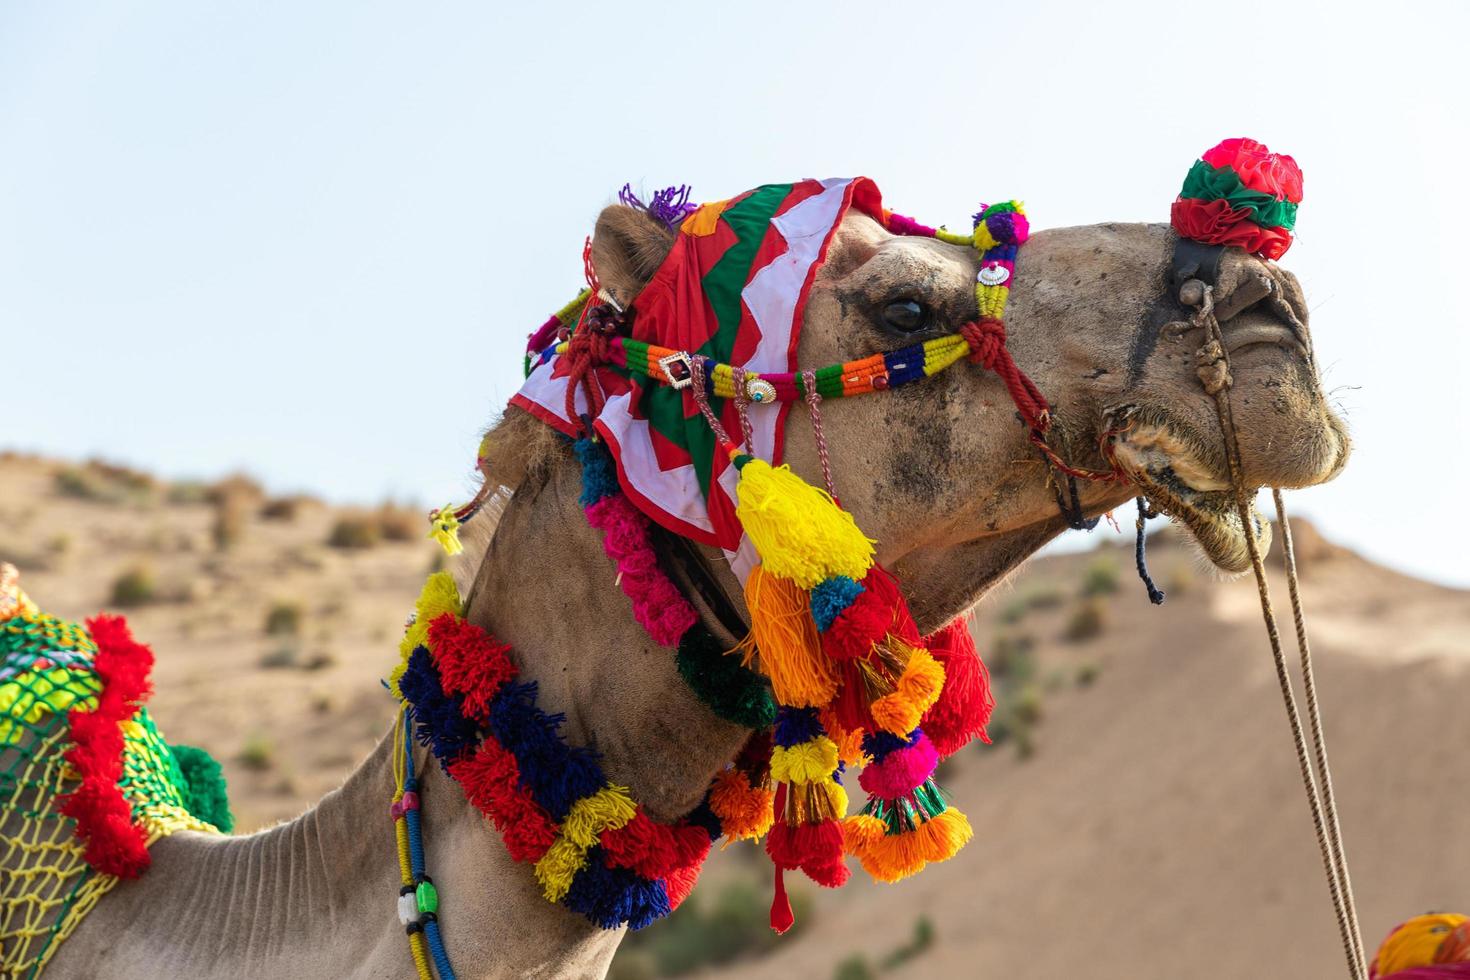 Camel with colorful headress photo